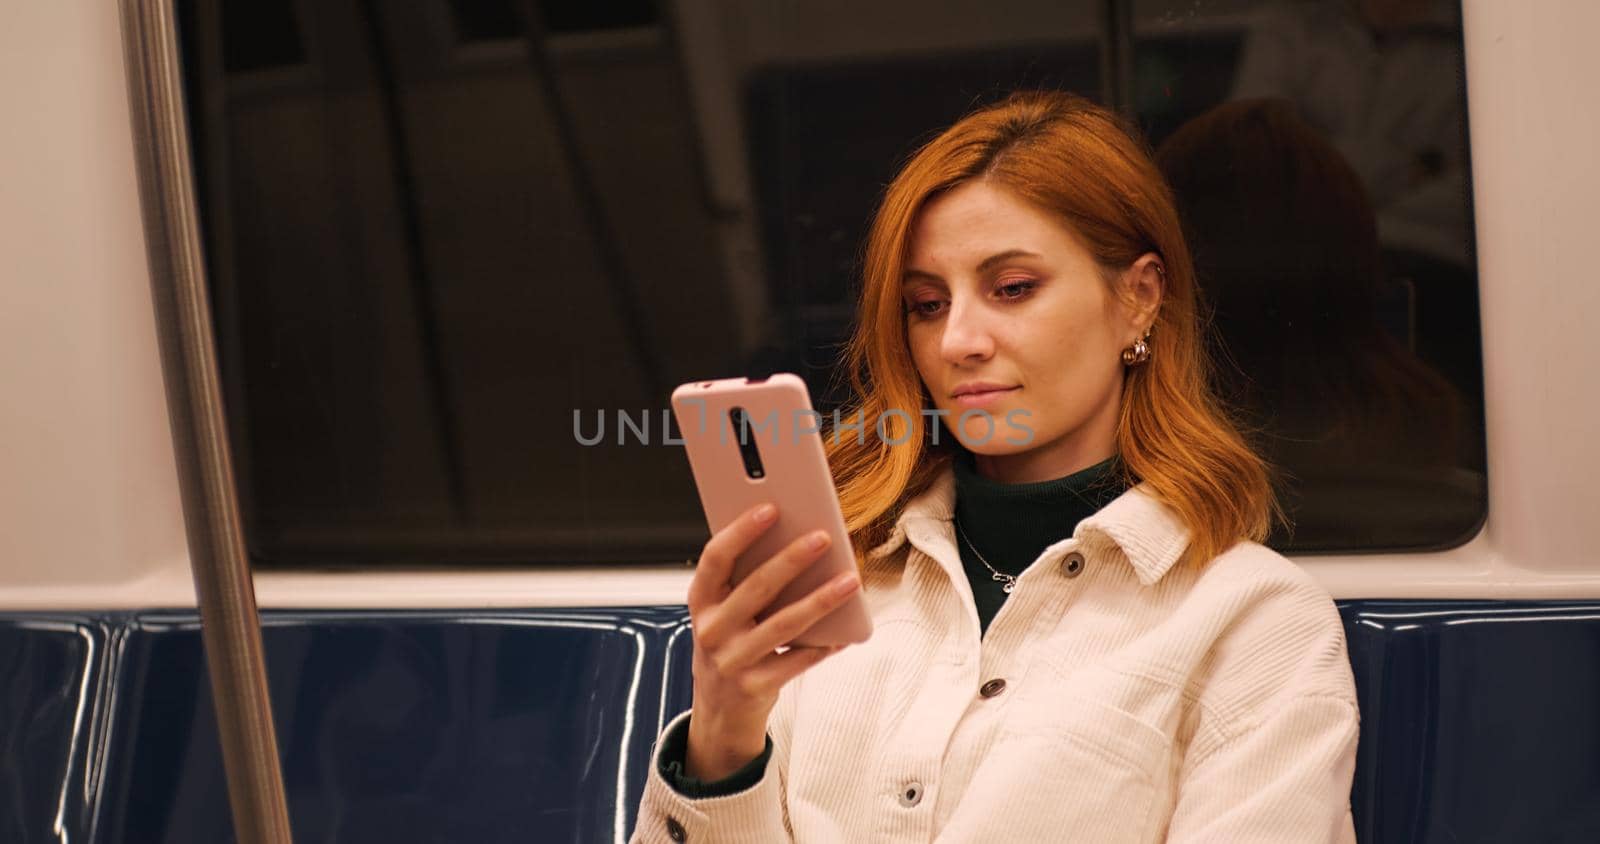 Woman on train using smartphone scrolling. by RecCameraStock